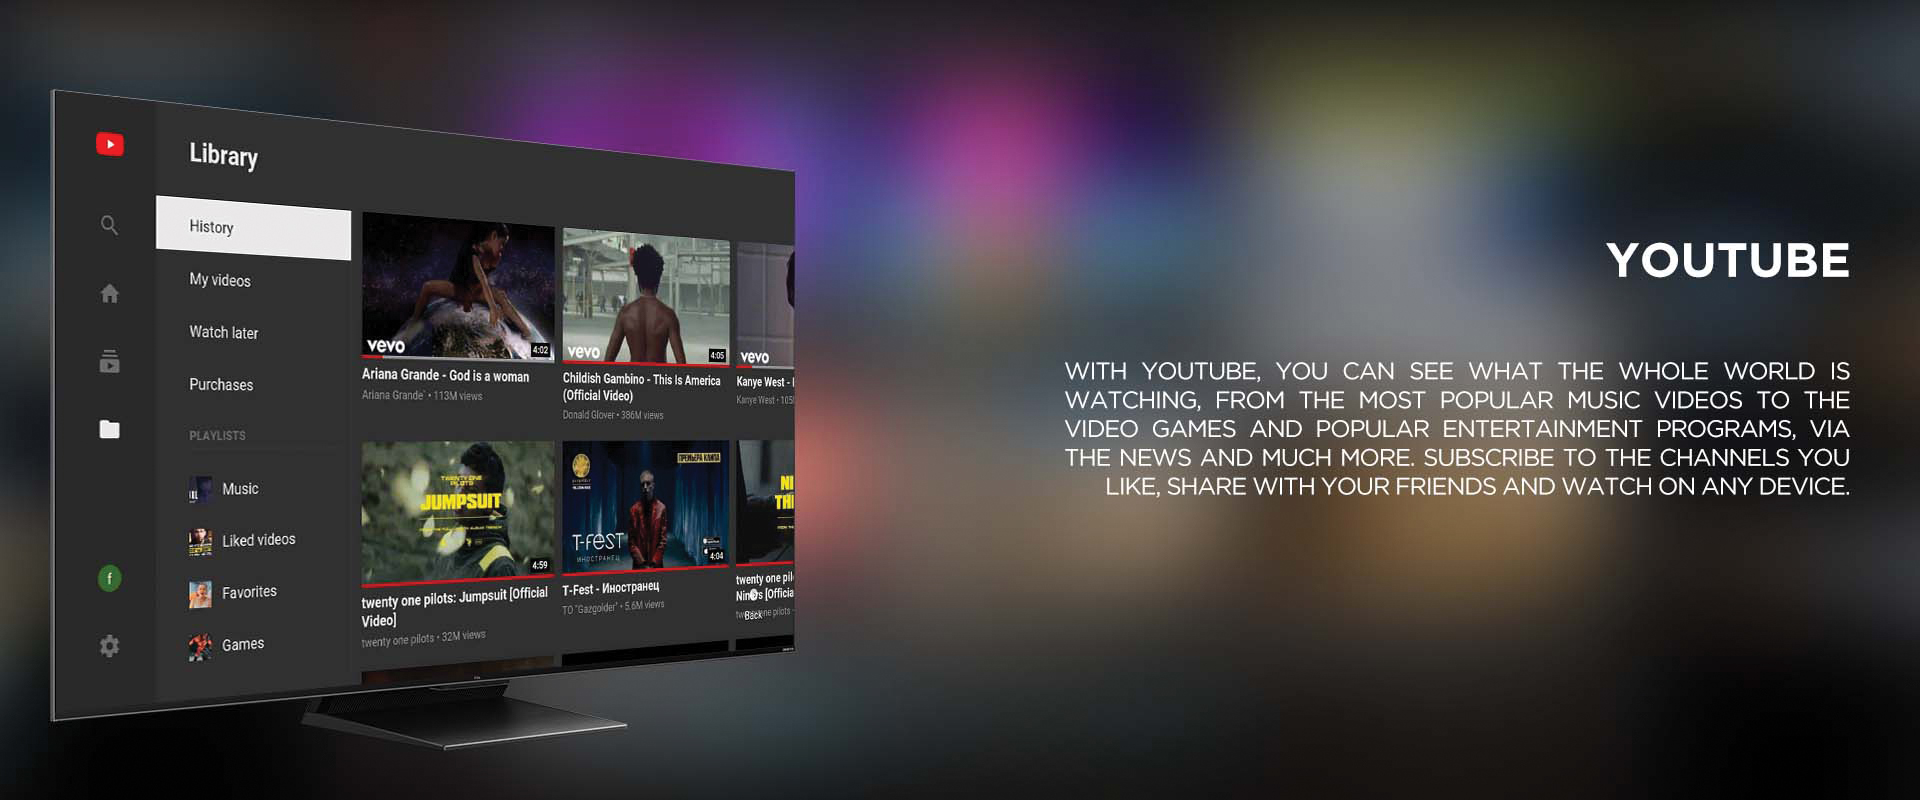 YOUTUBE - WITH YOUTUBE, YOU CAN SEE WHAT THE WHOLE WORLD IS WATCHING, FROM THE MOST POPULAR MUSIC VIDEOS TO THE VIDEO GAMES AND POPULAR ENTERTAINMENT PROGRAMS, VIA THE NEWS AND MUCH MORE. SUBSCRIBE TO THE CHANNELS YOU LIKE, SHARE WITH YOUR FRIENDS AND WATCH ON ANY DEVICE.